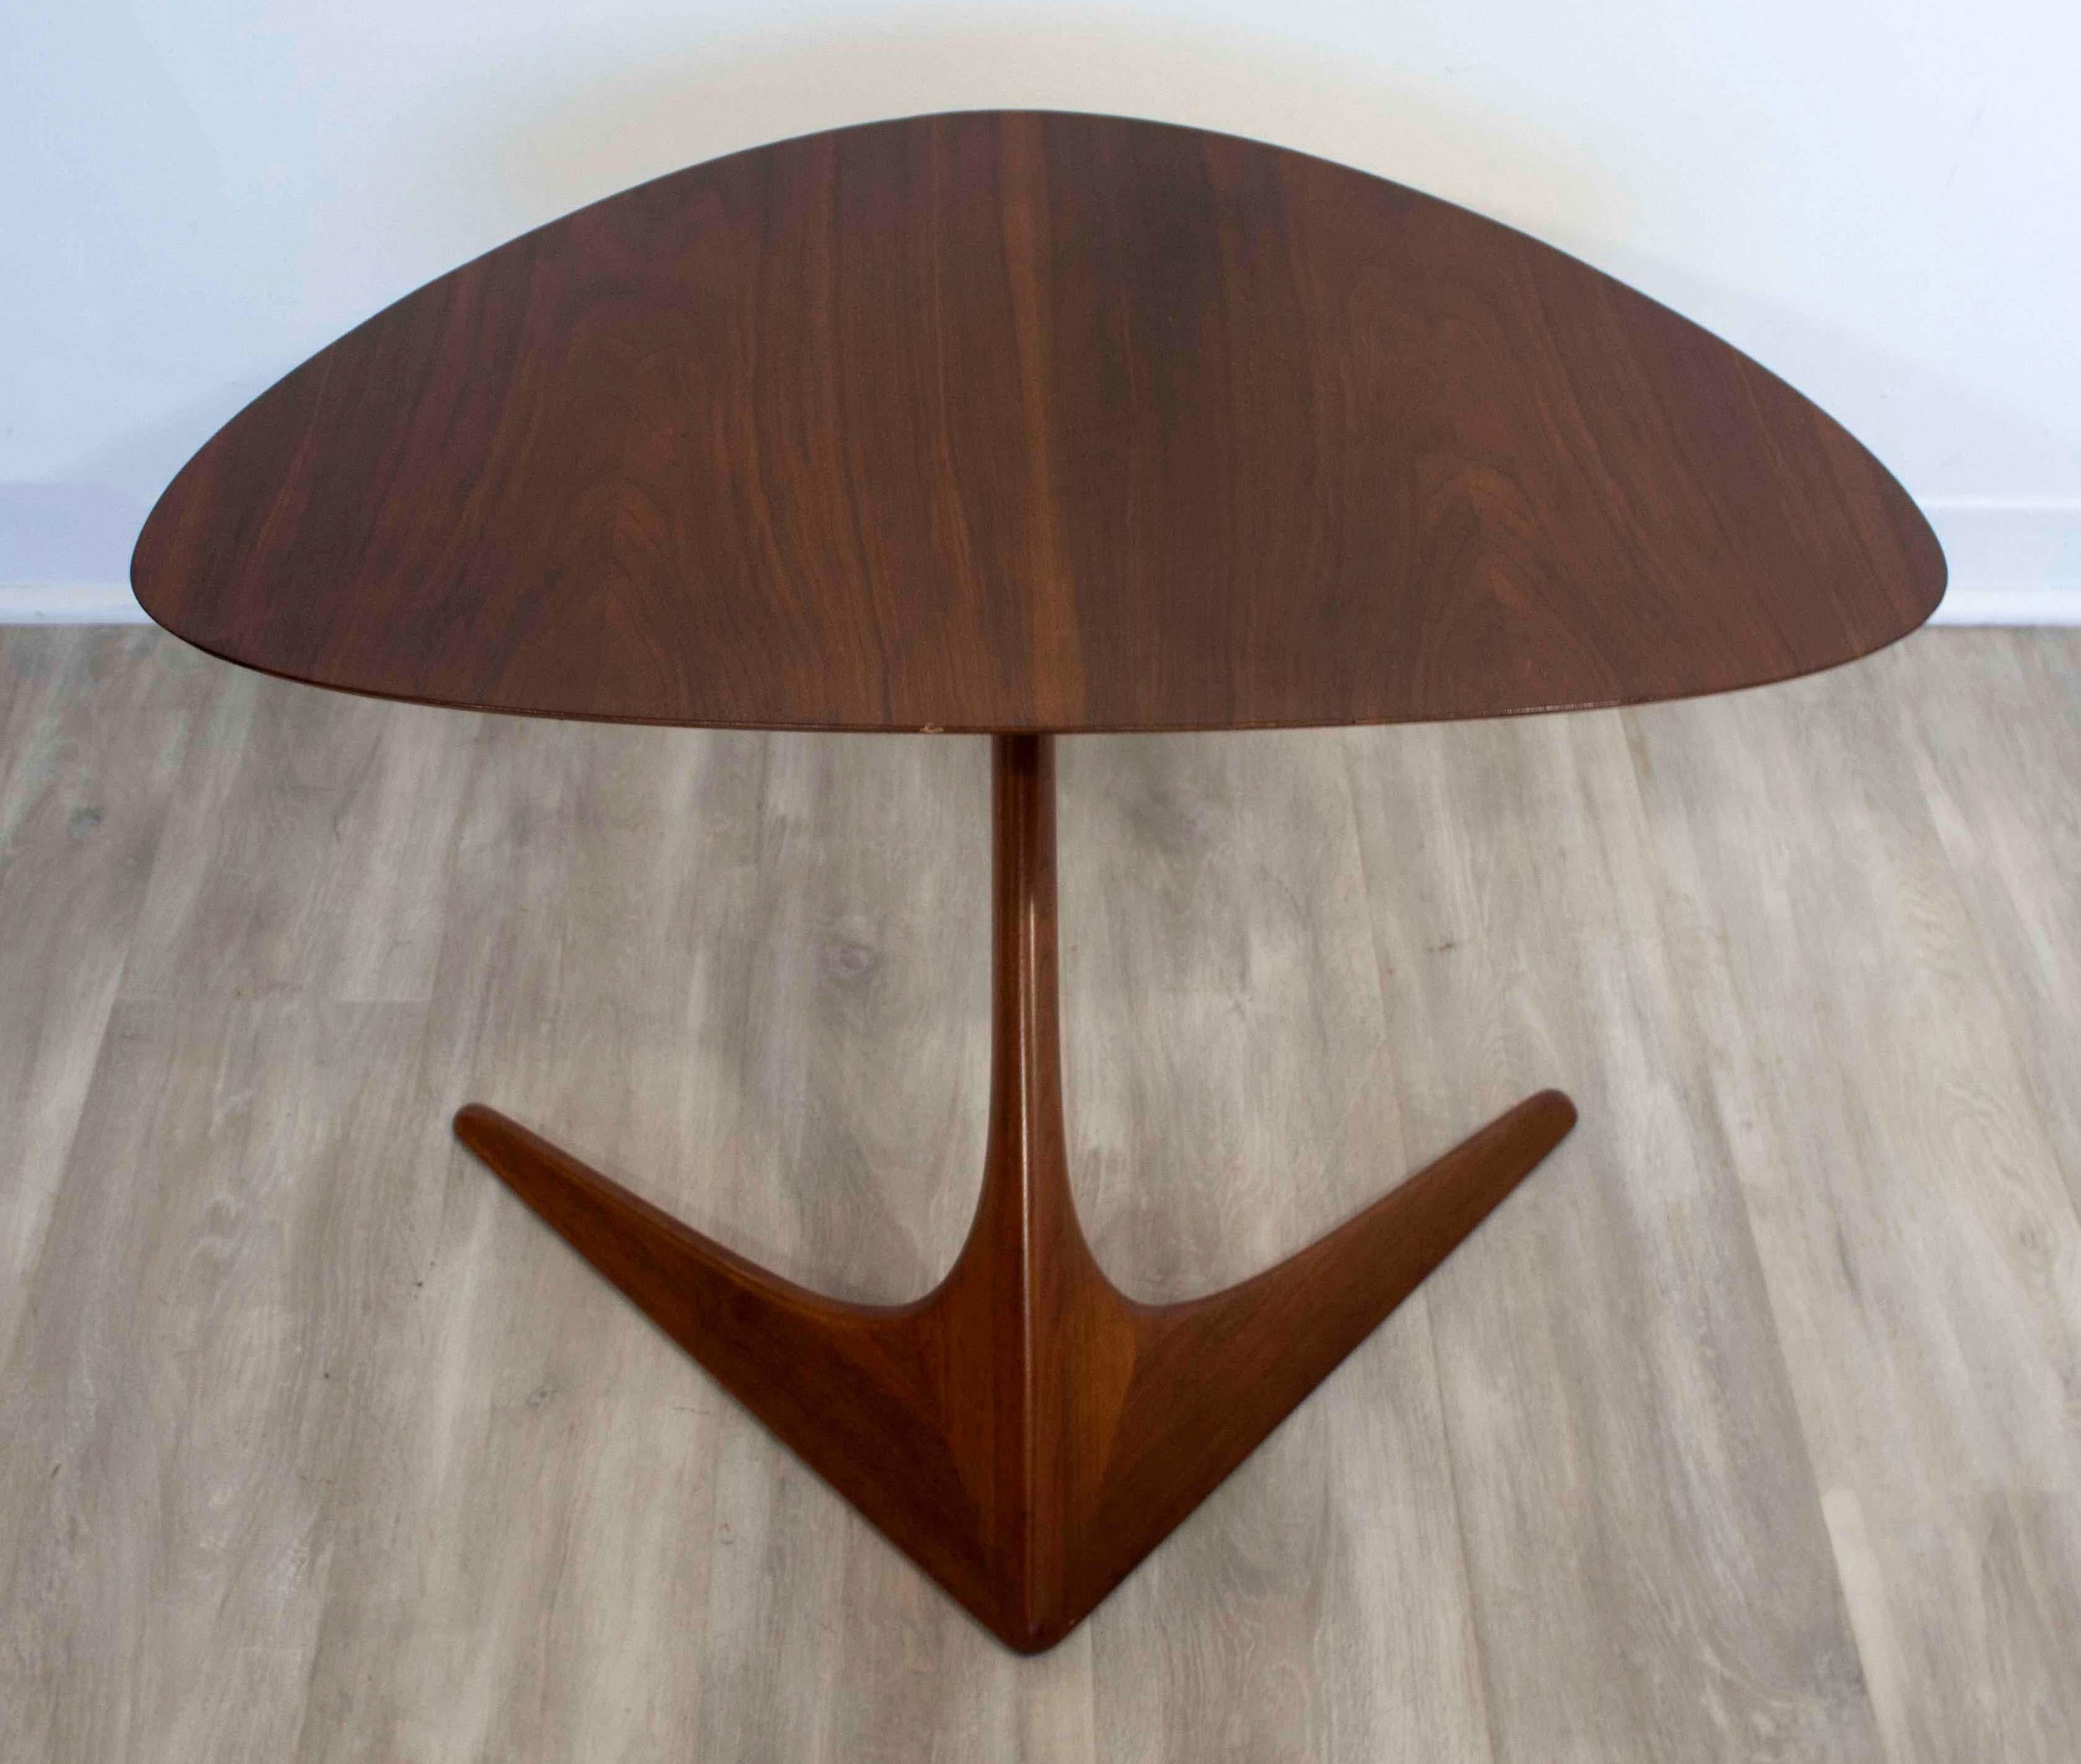 For your consideration is an authentic vintage cantilever Unicorn End Table designed by Vladimir Kagan with stamp on verso 

This table is showcases iconic Kagan design with the V-shape that is inspired by a sense of movement in futuristic